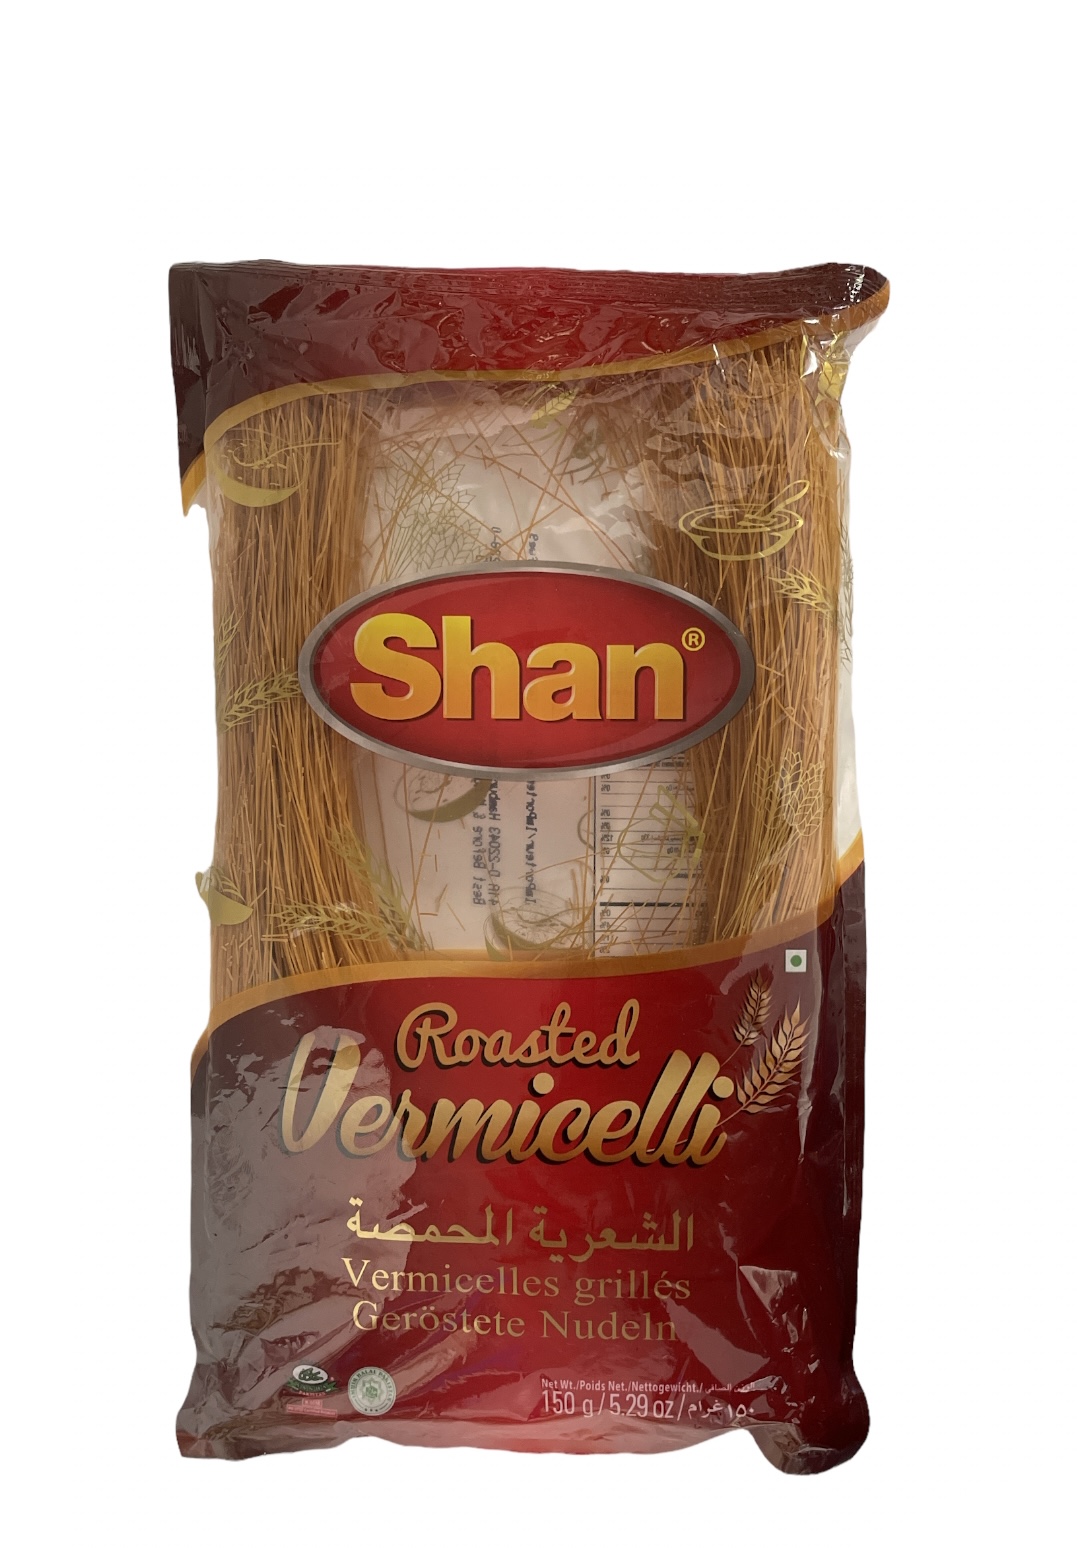 Shan Roasted Vermicelli,150g